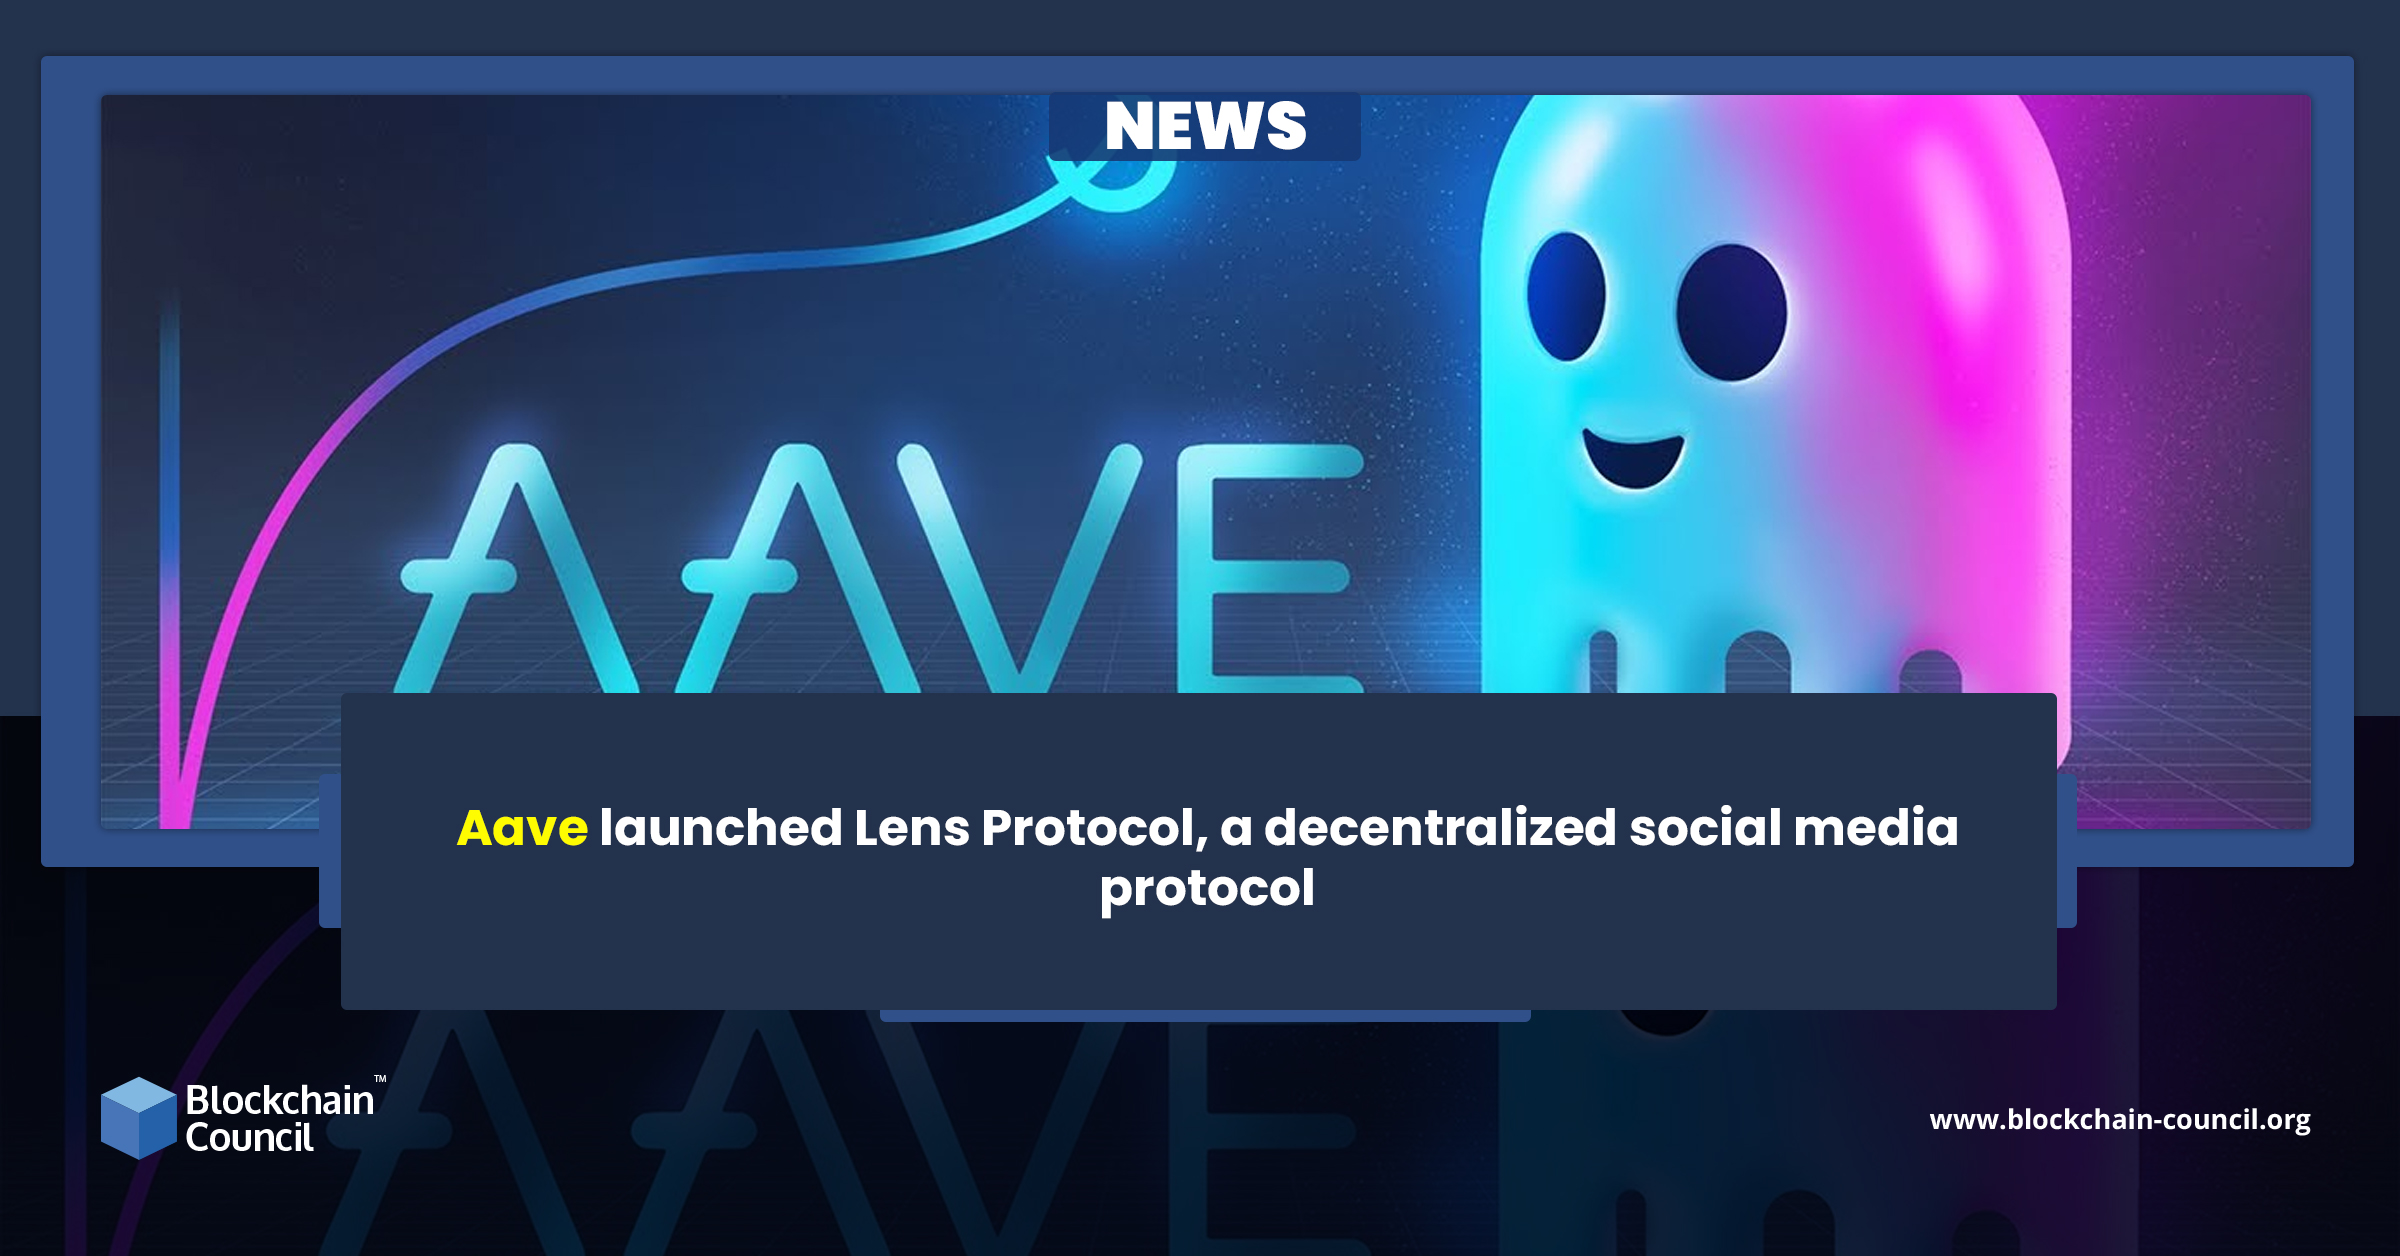 Aave launched Lens Protocol, a decentralized social media protocol